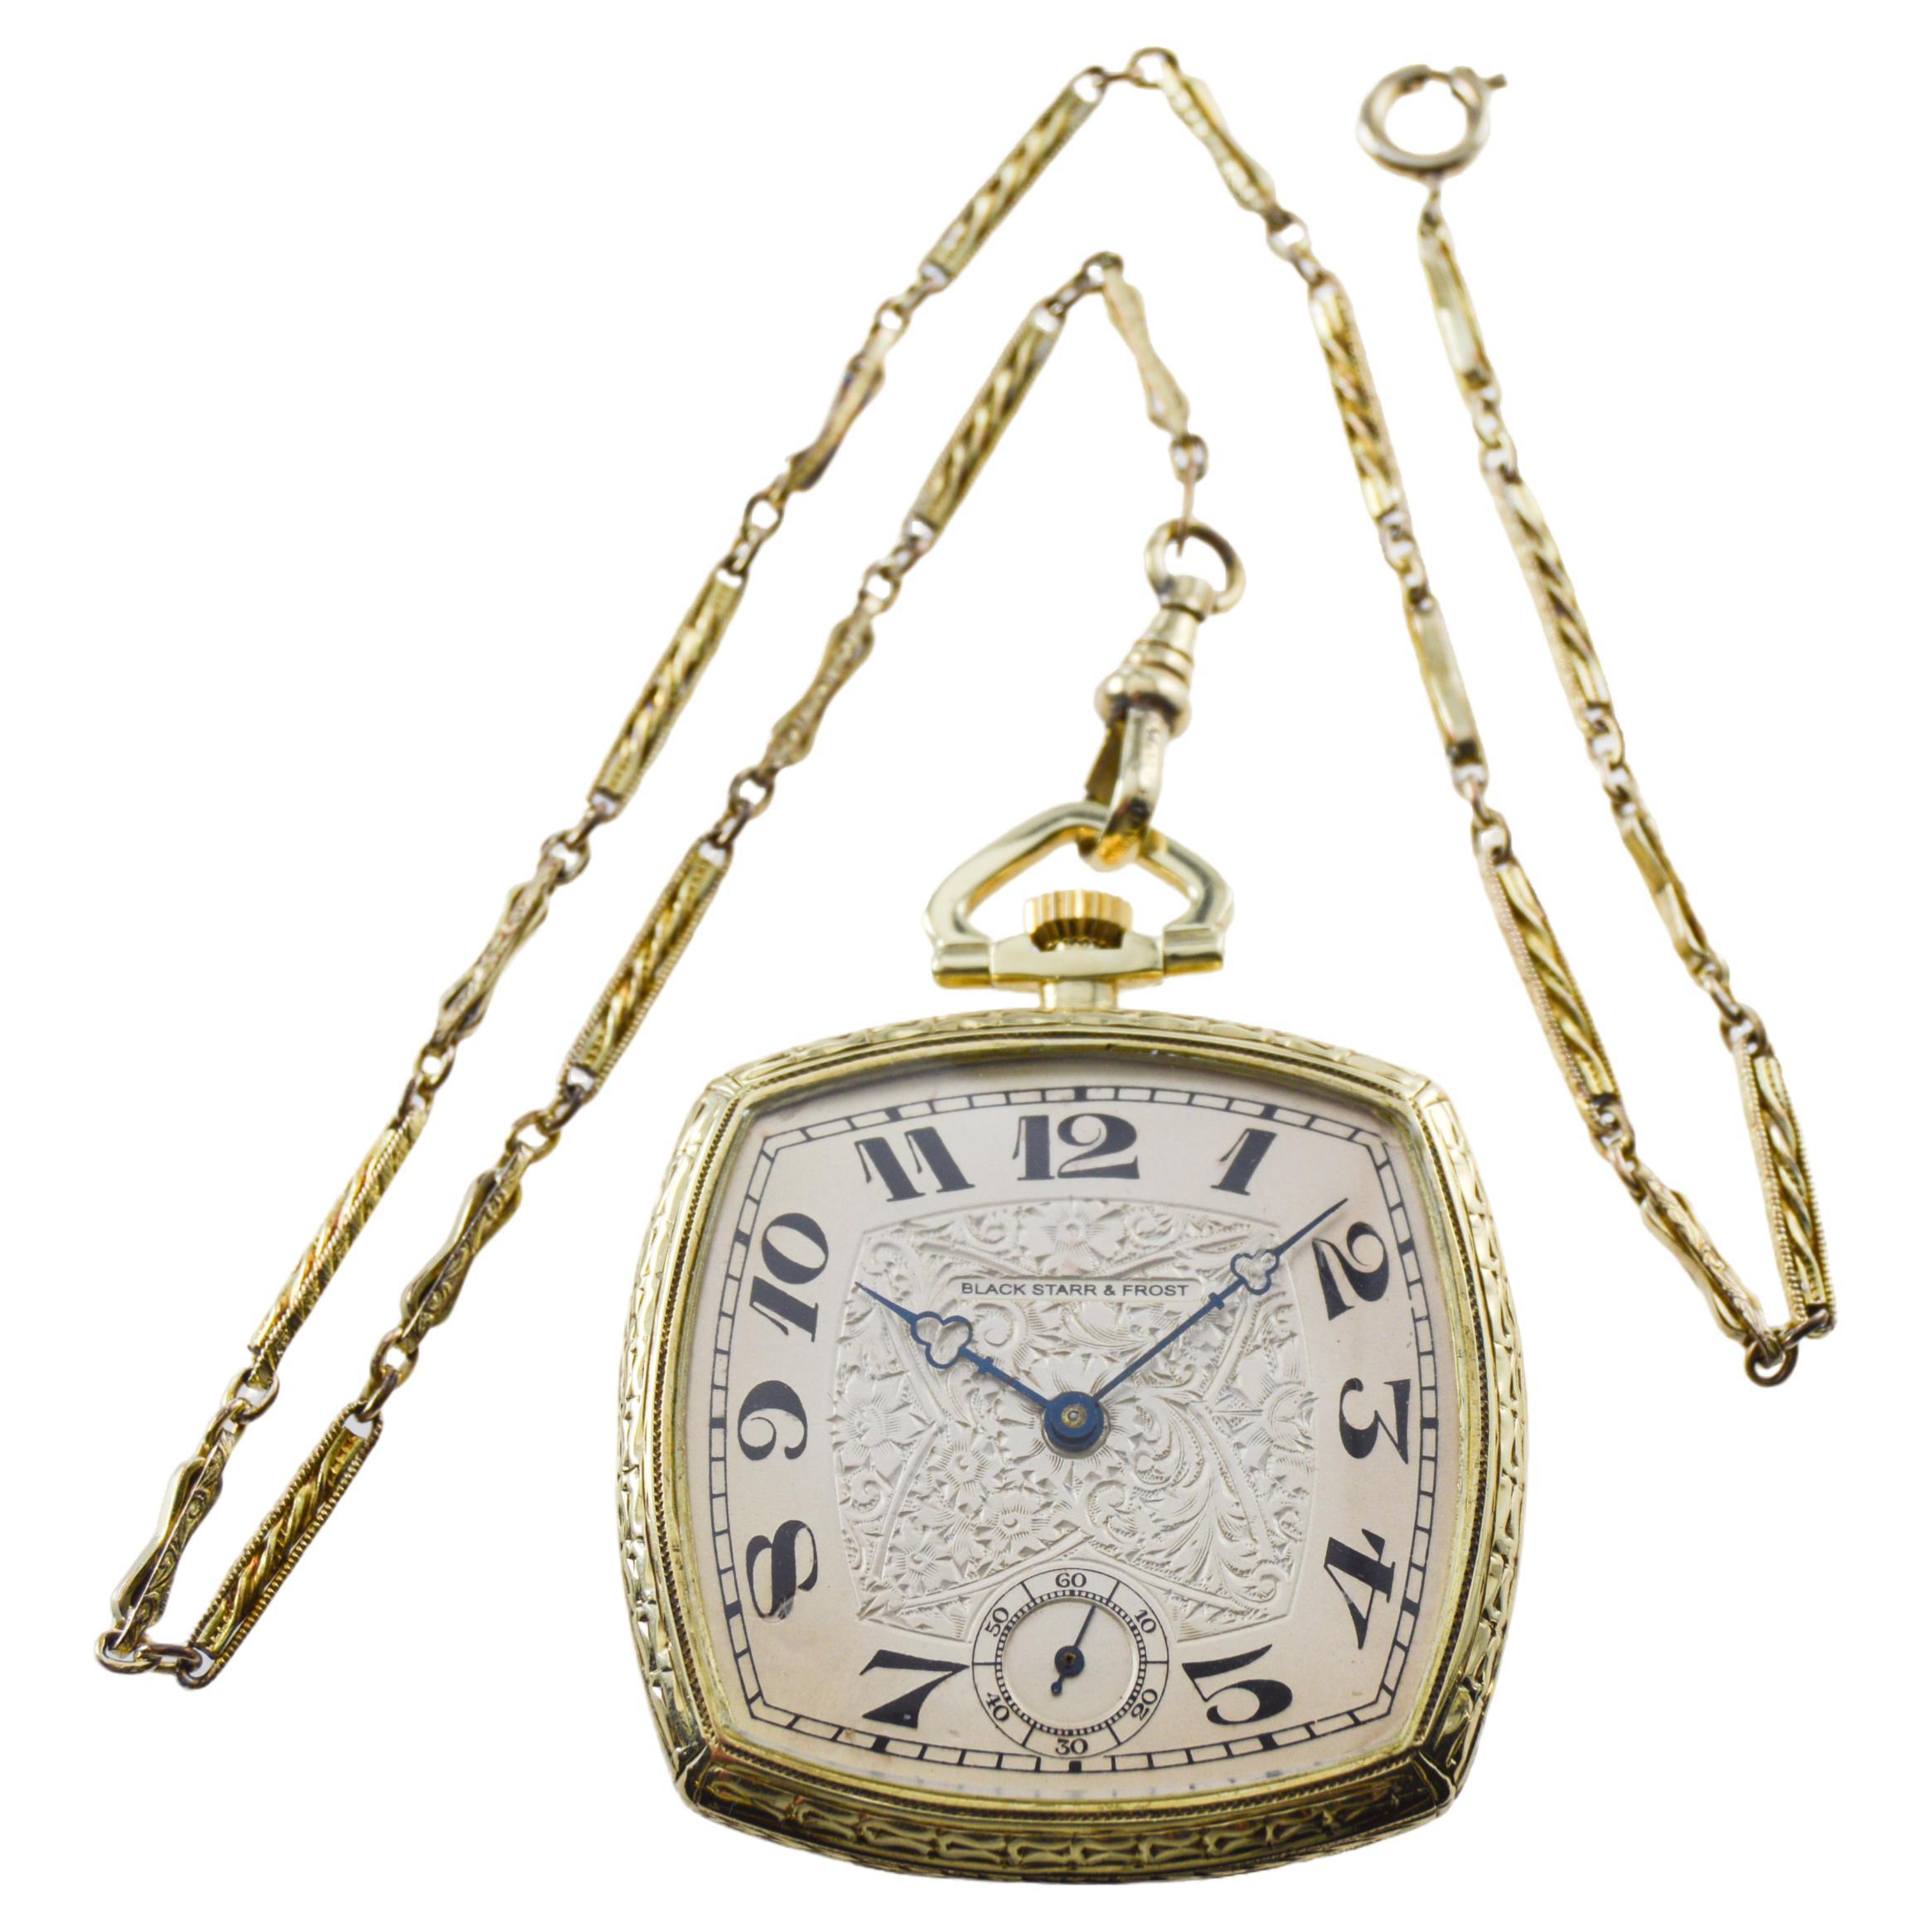 FACTORY / HOUSE: Black Starr & Frost by Paul Valletti
STYLE / REFERENCE: Cushion Shaped Open Face / Pocket Watch
METAL / MATERIAL: 14kt Solid Yellow Gold
CIRCA: 1920's
DIMENSIONS: Diameter 41mm
MOVEMENT / CALIBER: Manual Winding / 17 Jewels / High